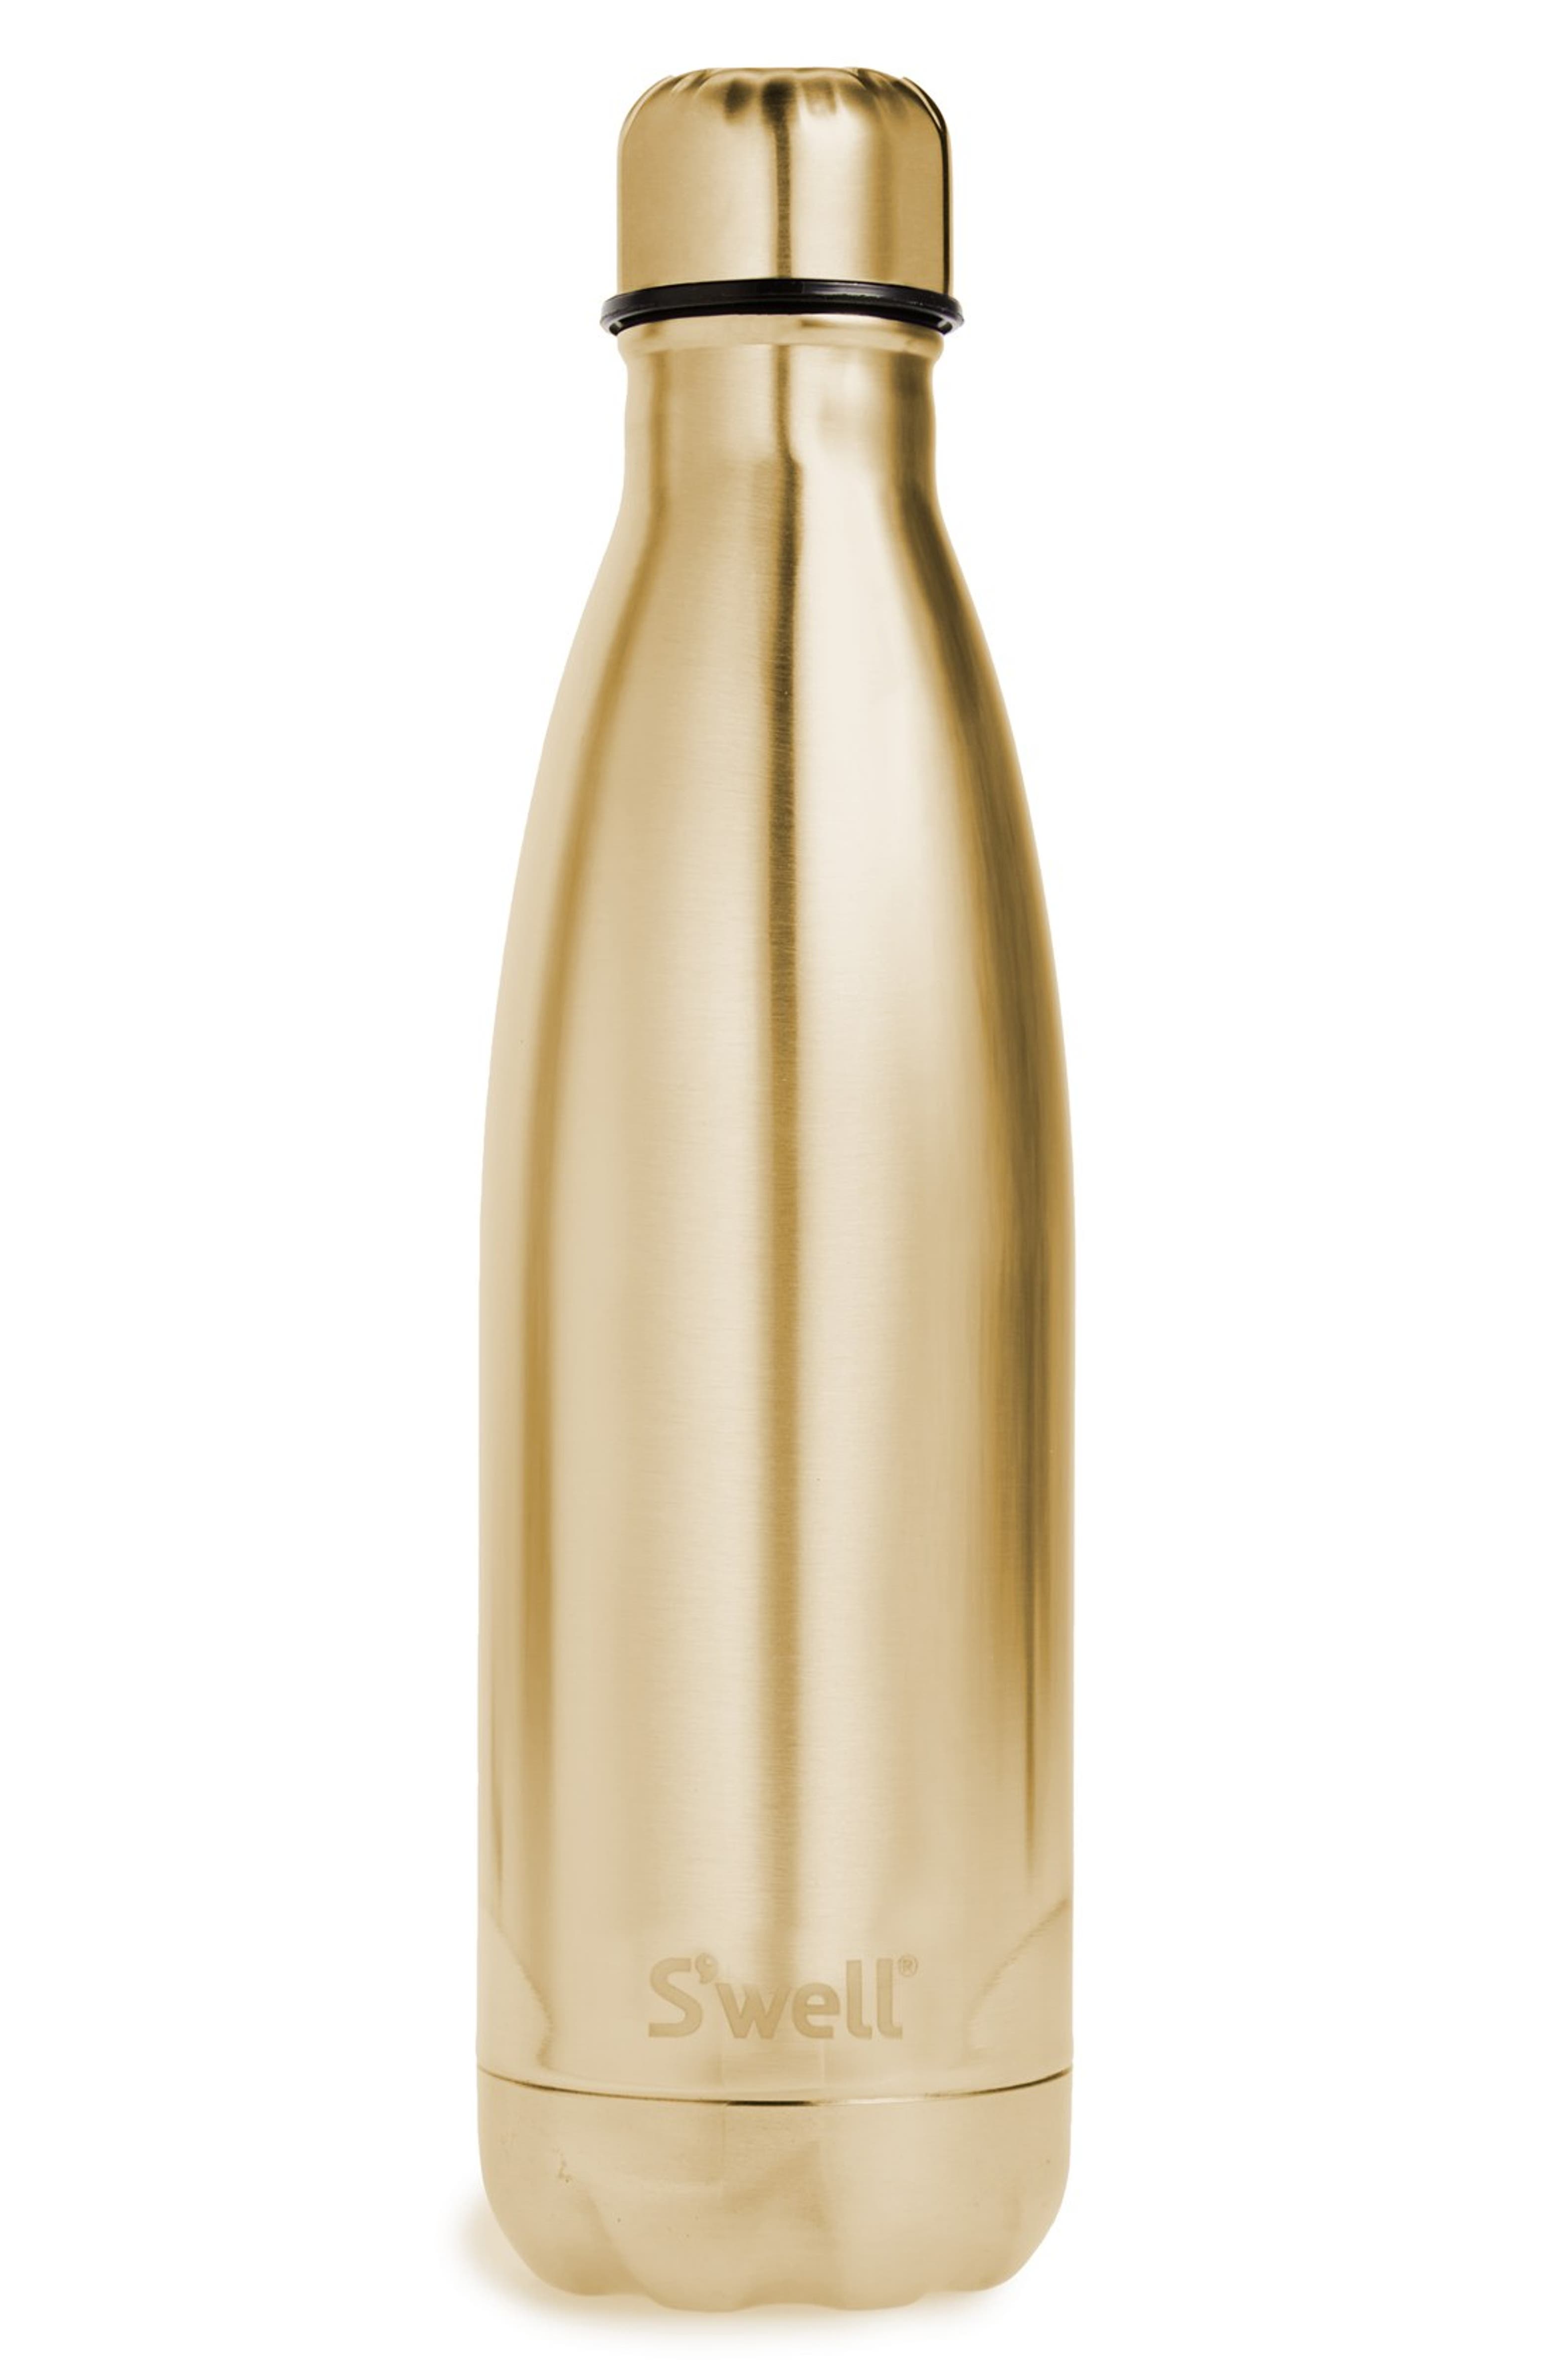 S'well 'Metallic Collection - Yellow Gold' Stainless Steel Water Bottle S'well Stainless Steel Water Bottle